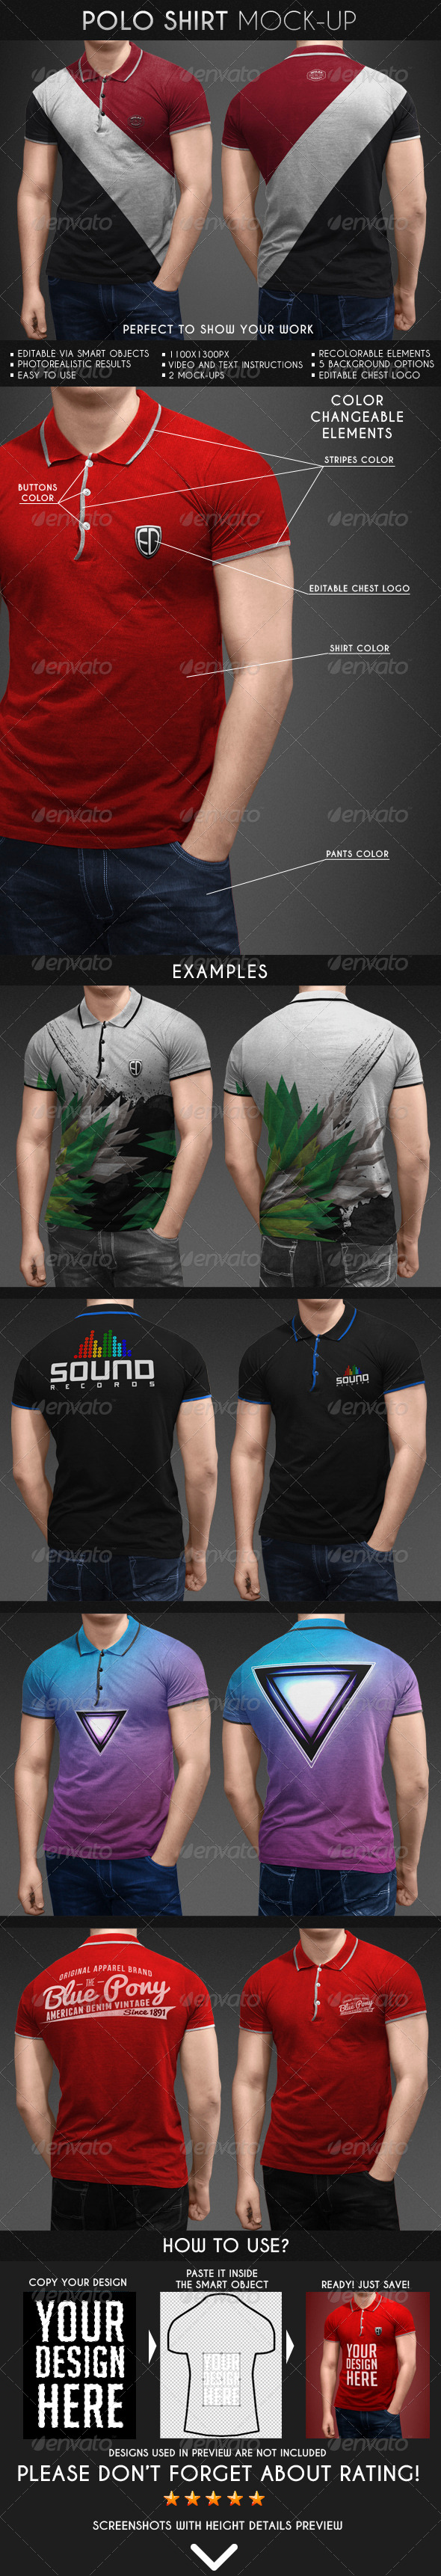 Polo Shirt Mock-Up by Eugene-design | GraphicRiver